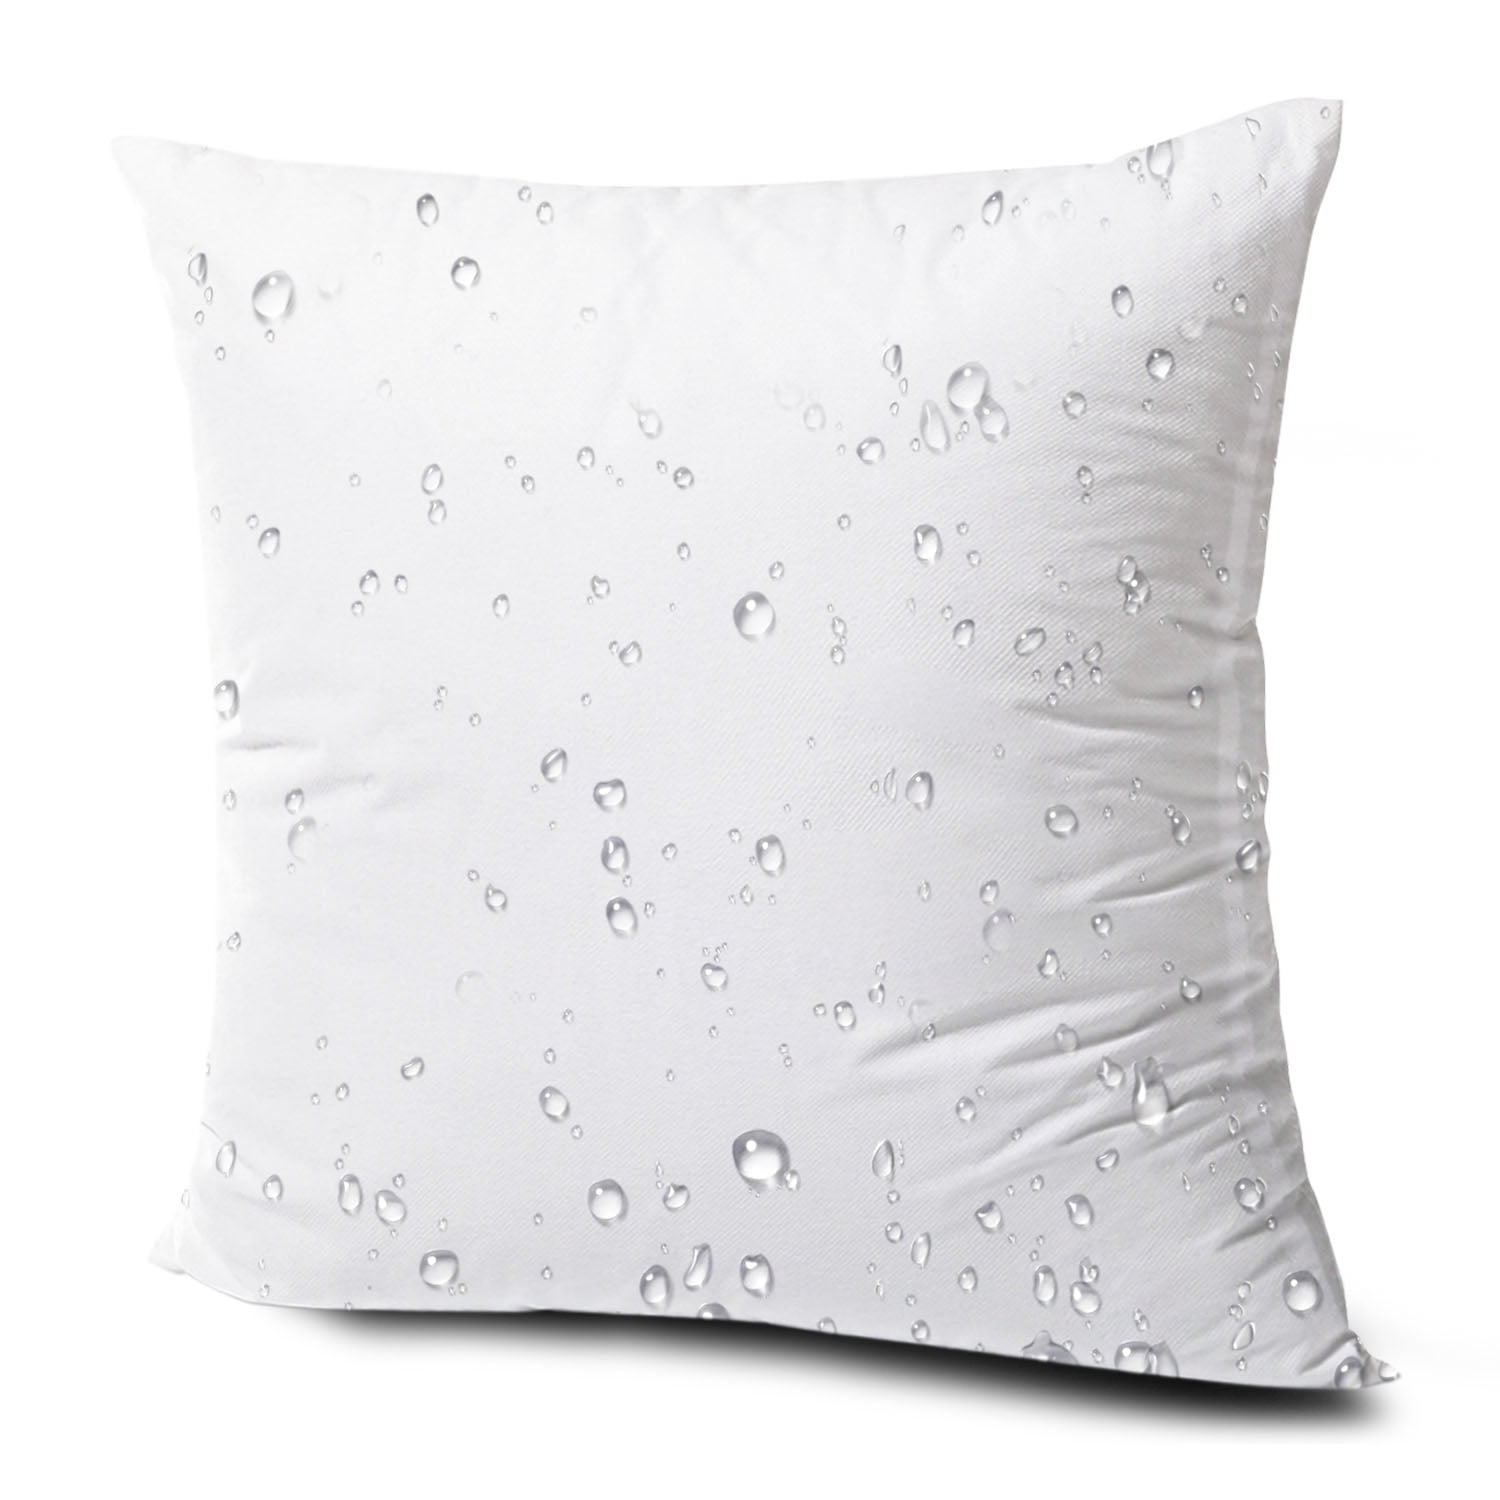 UNIKOME Outdoor Waterproof Throw Pillows 22x22 Feathers and Down